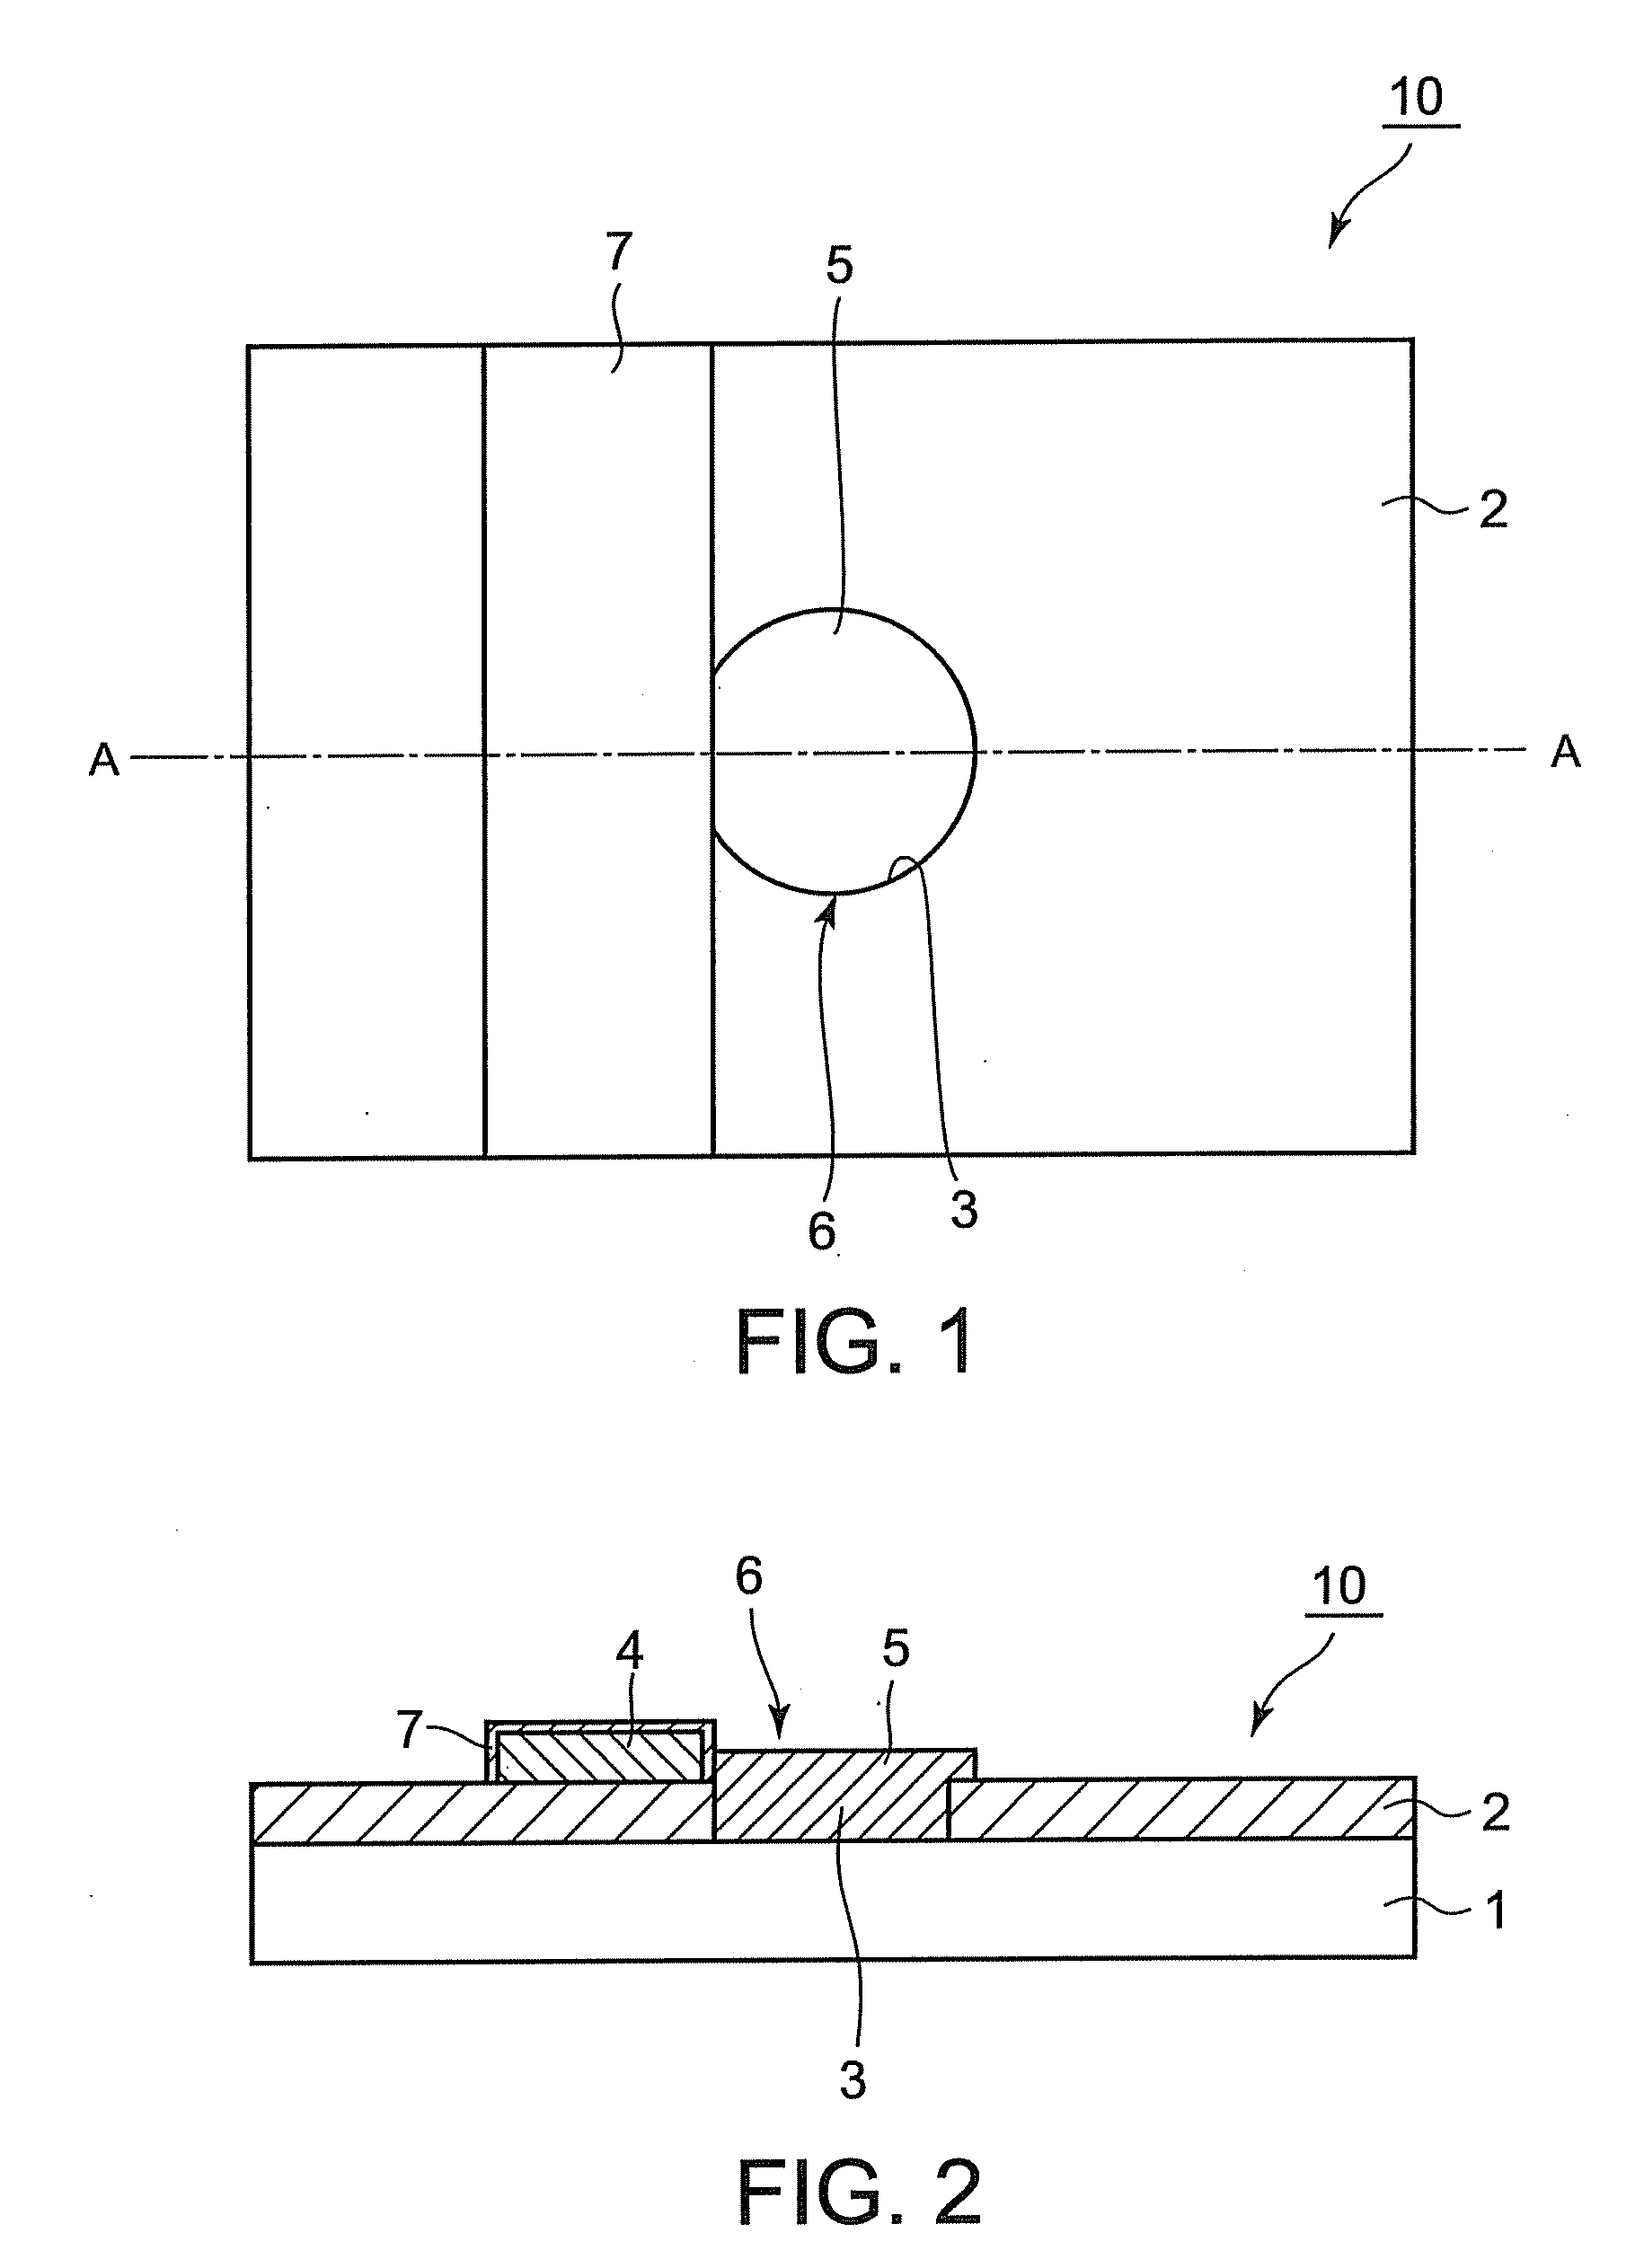 Substrate for suspension